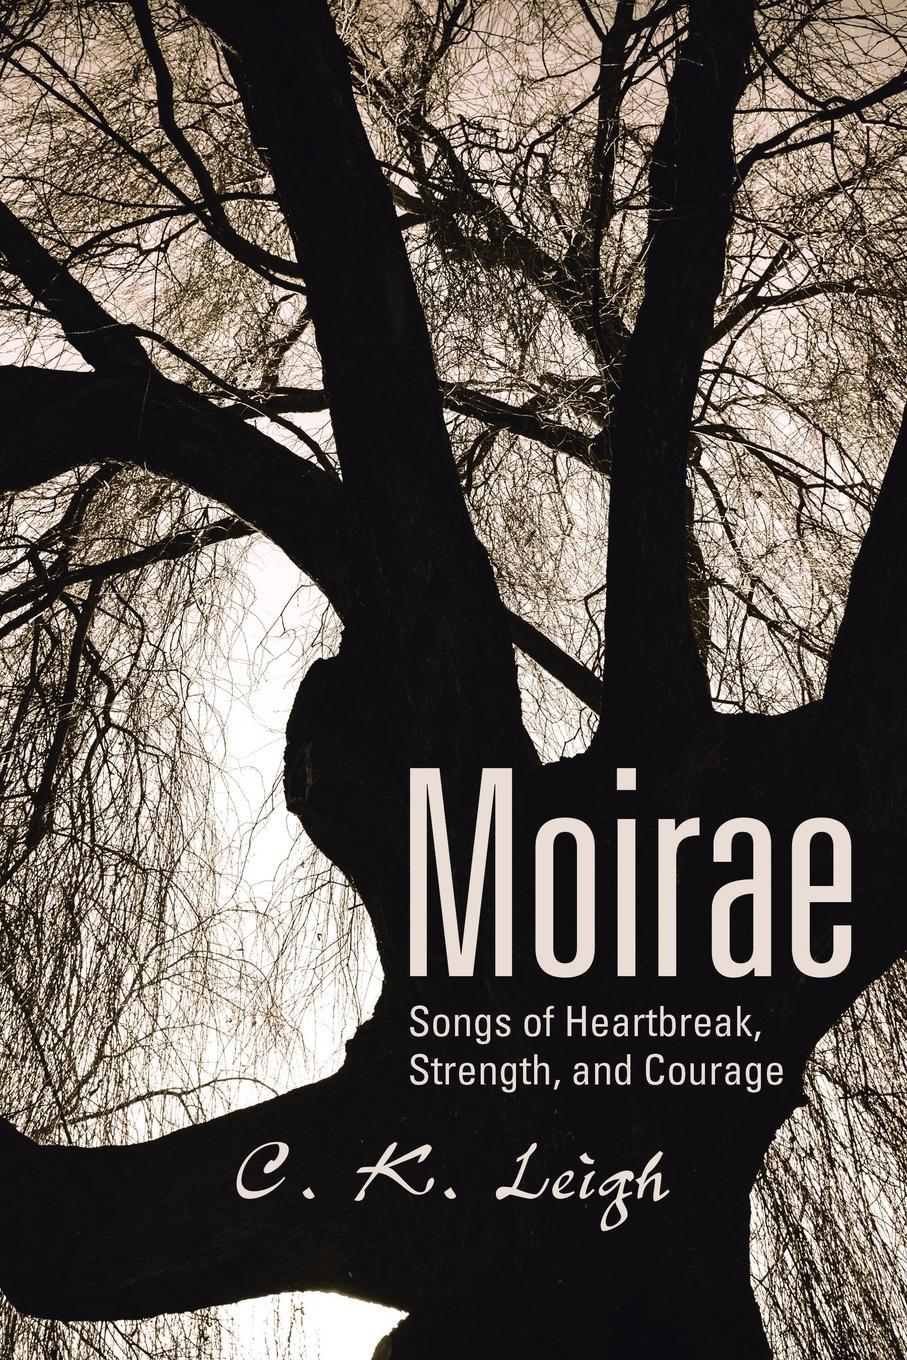 Moirae. Songs of Heartbreak, Strength, and Courage